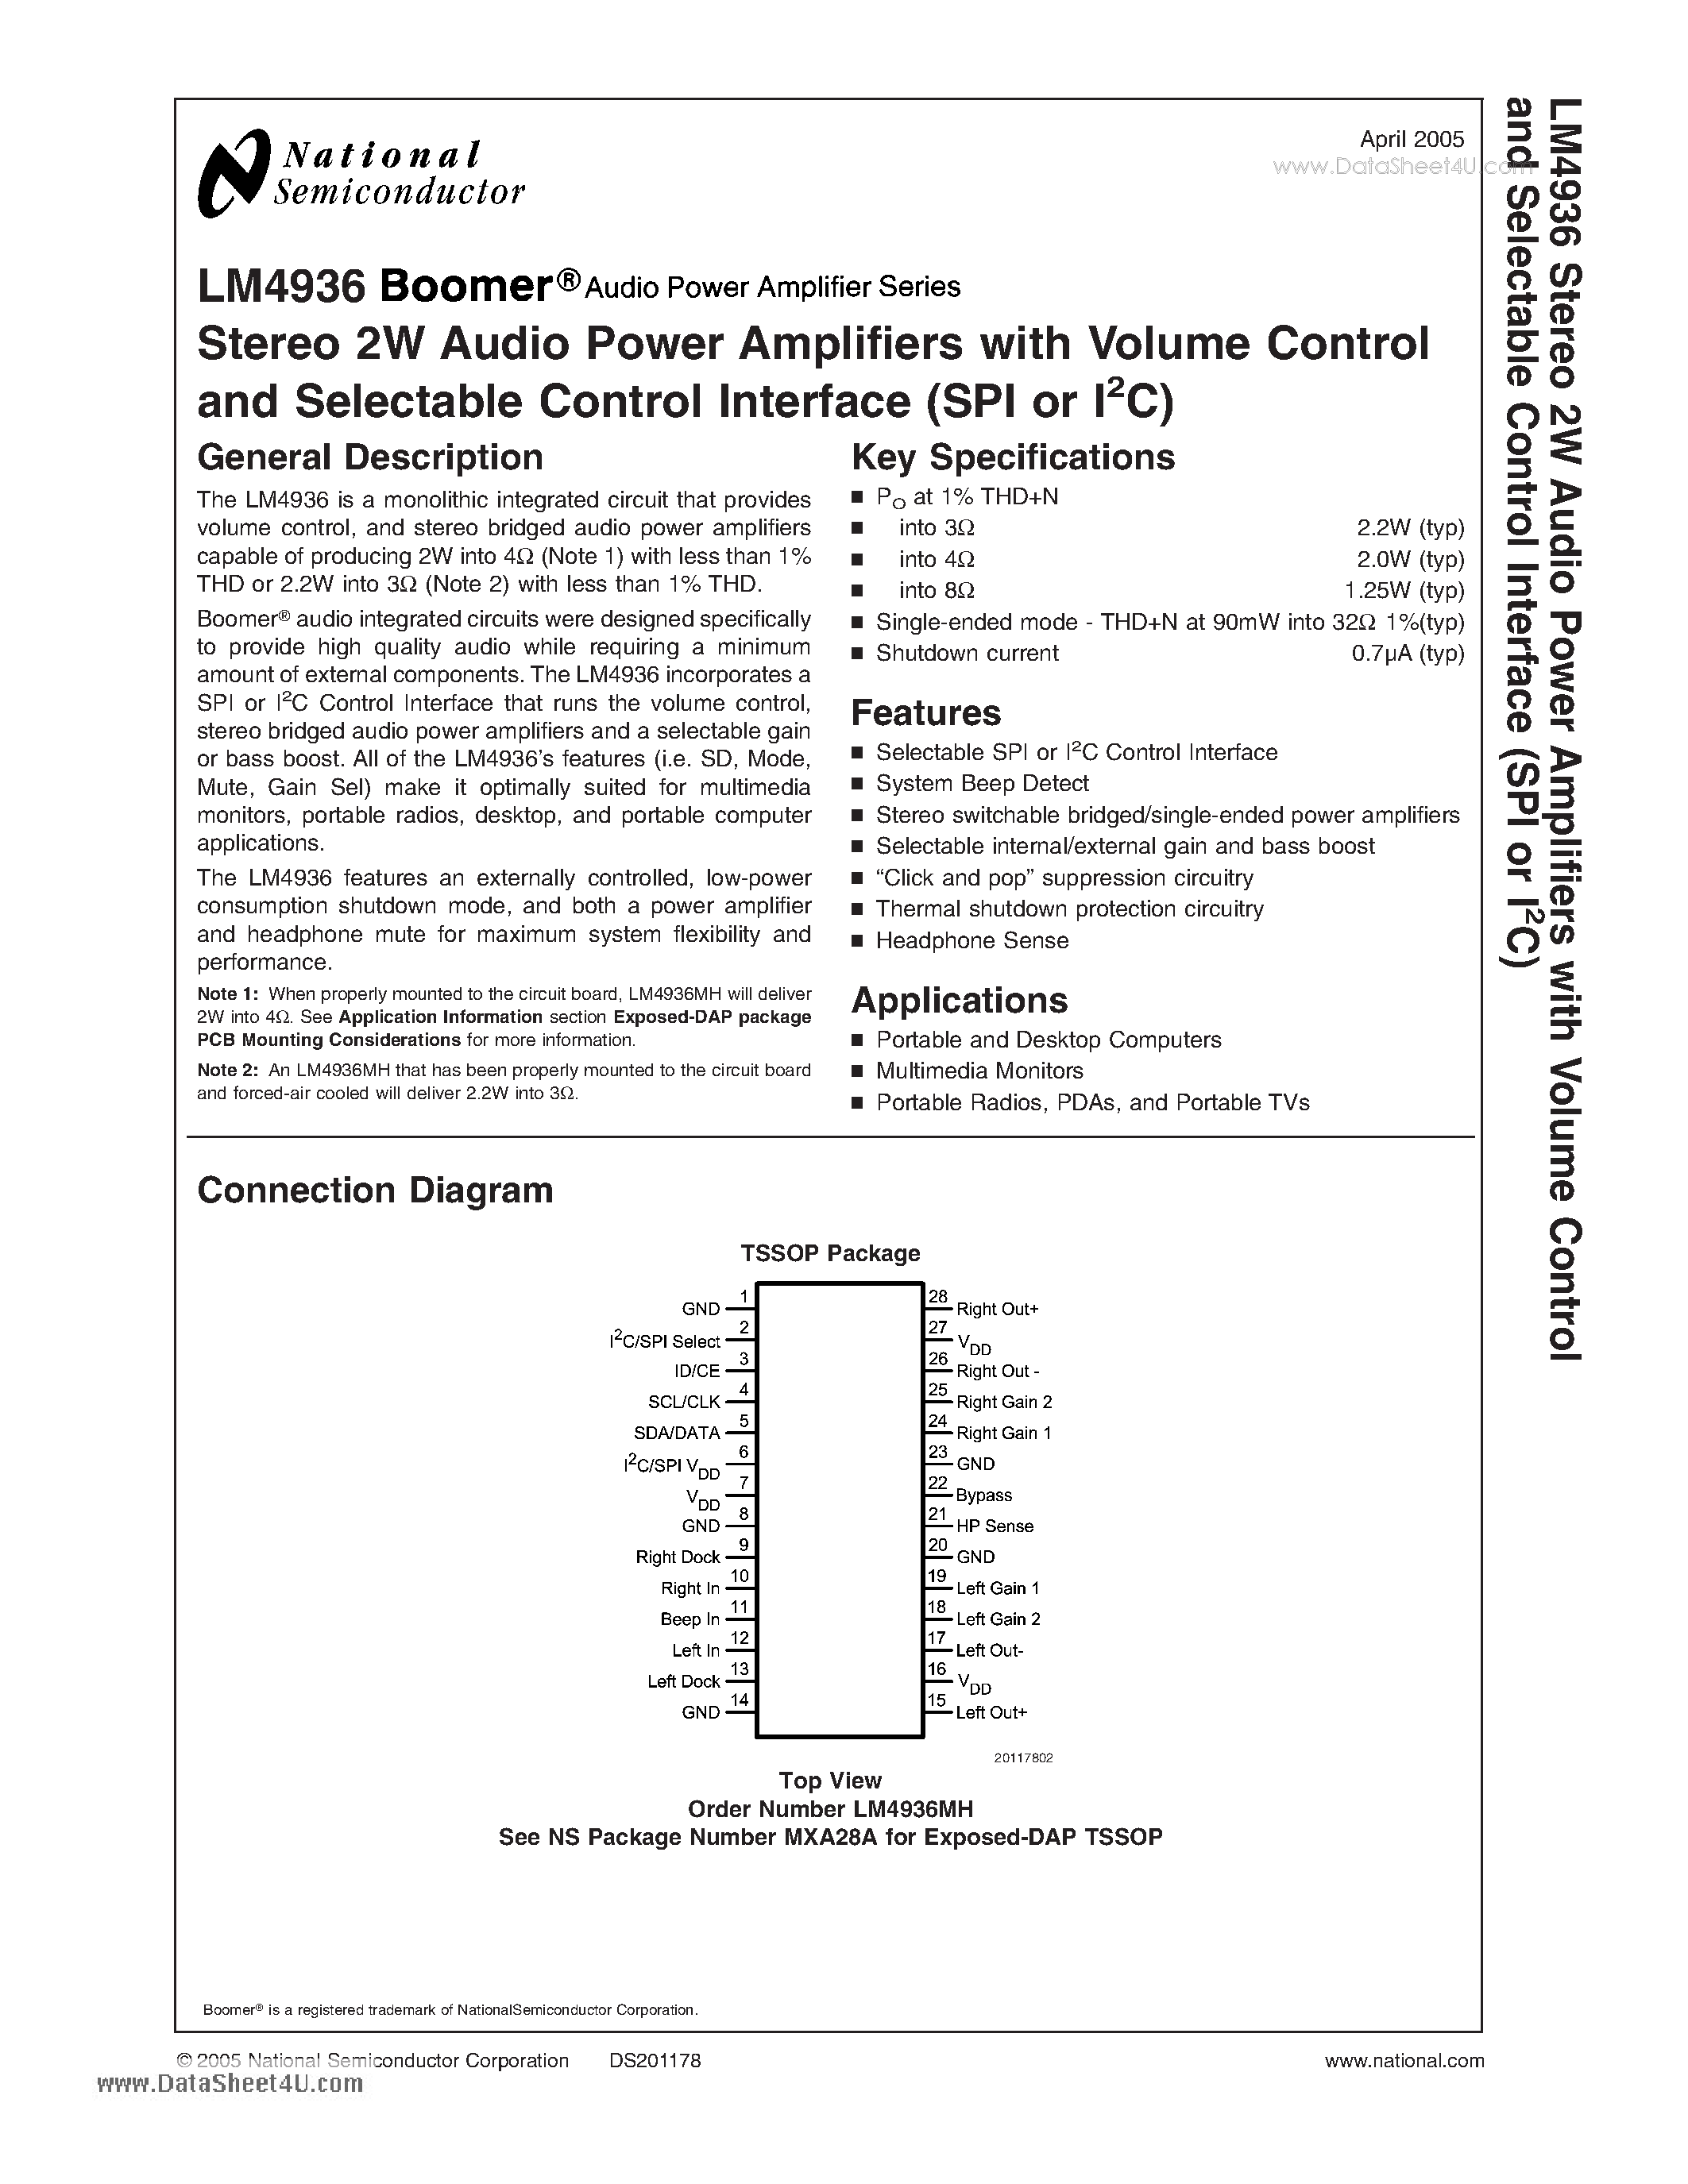 Datasheet LM4936 - Stereo 2W Audio Power Amplifiers with Volume Control and Selectable Control Interface (SPI or I2C) page 1